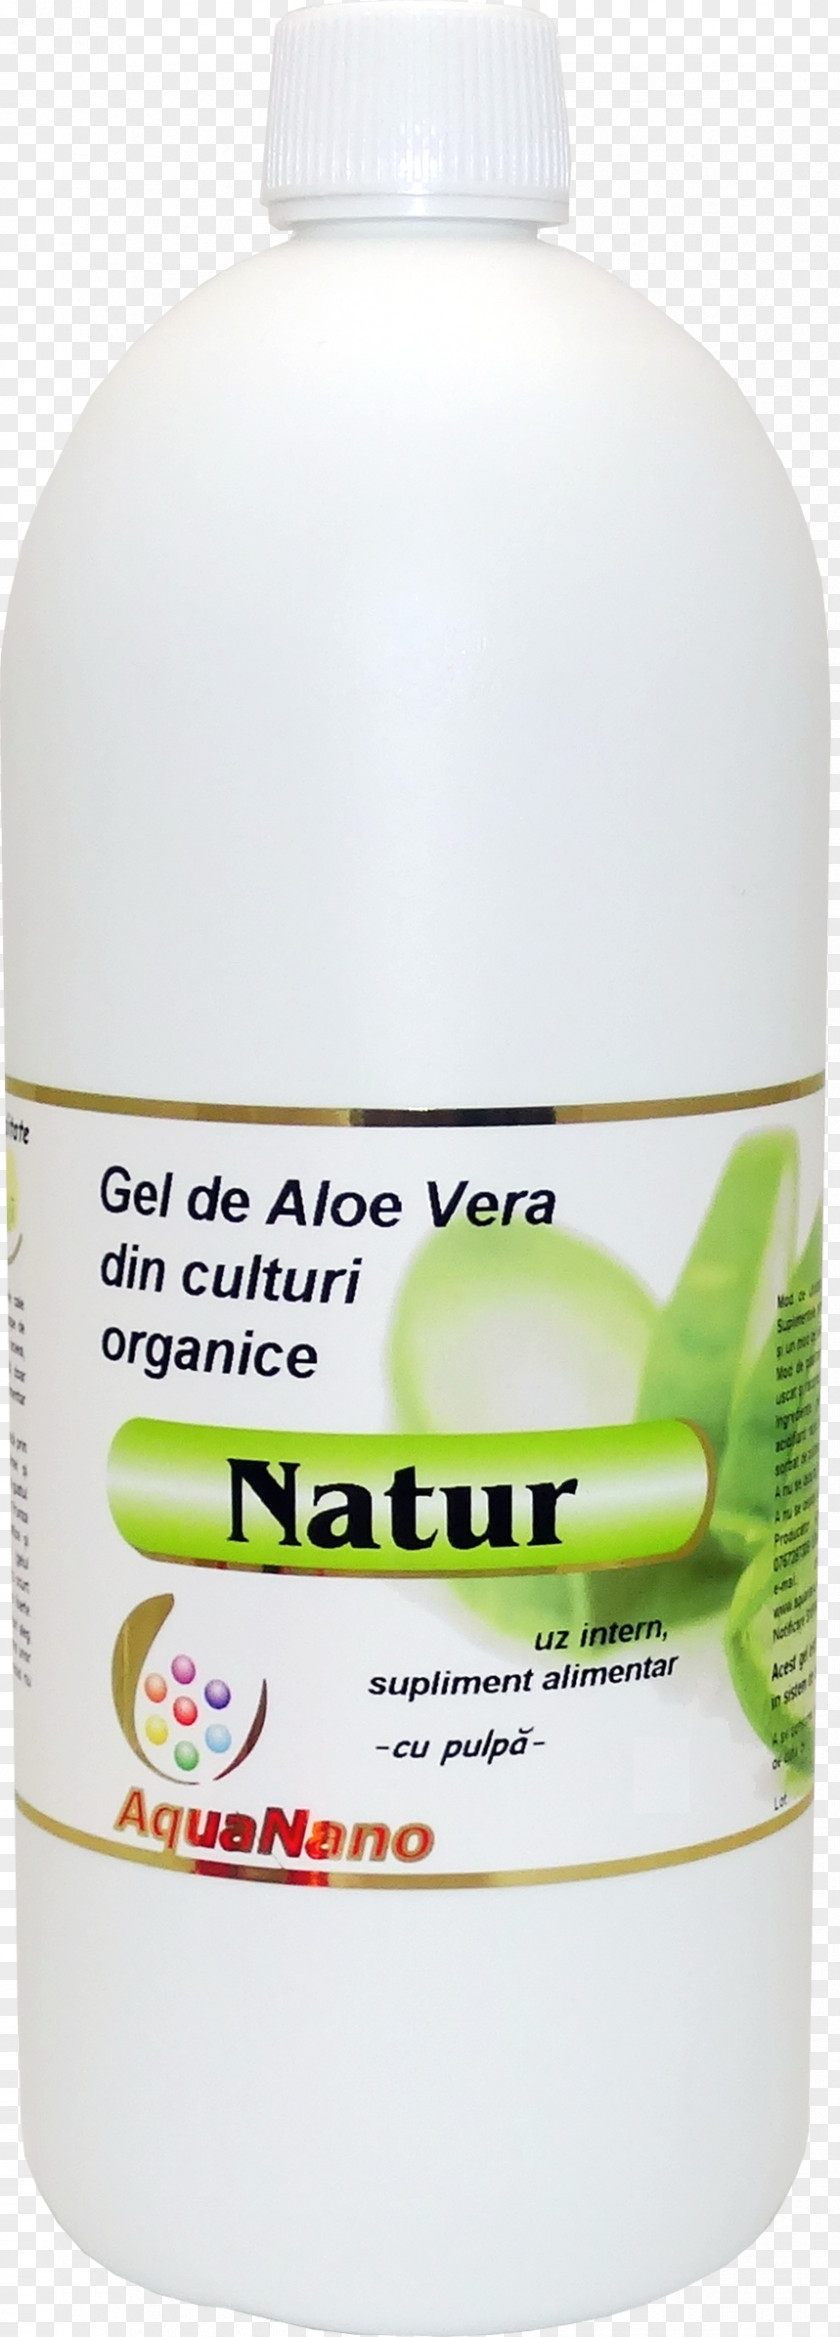 Aloe Lotion Product PNG